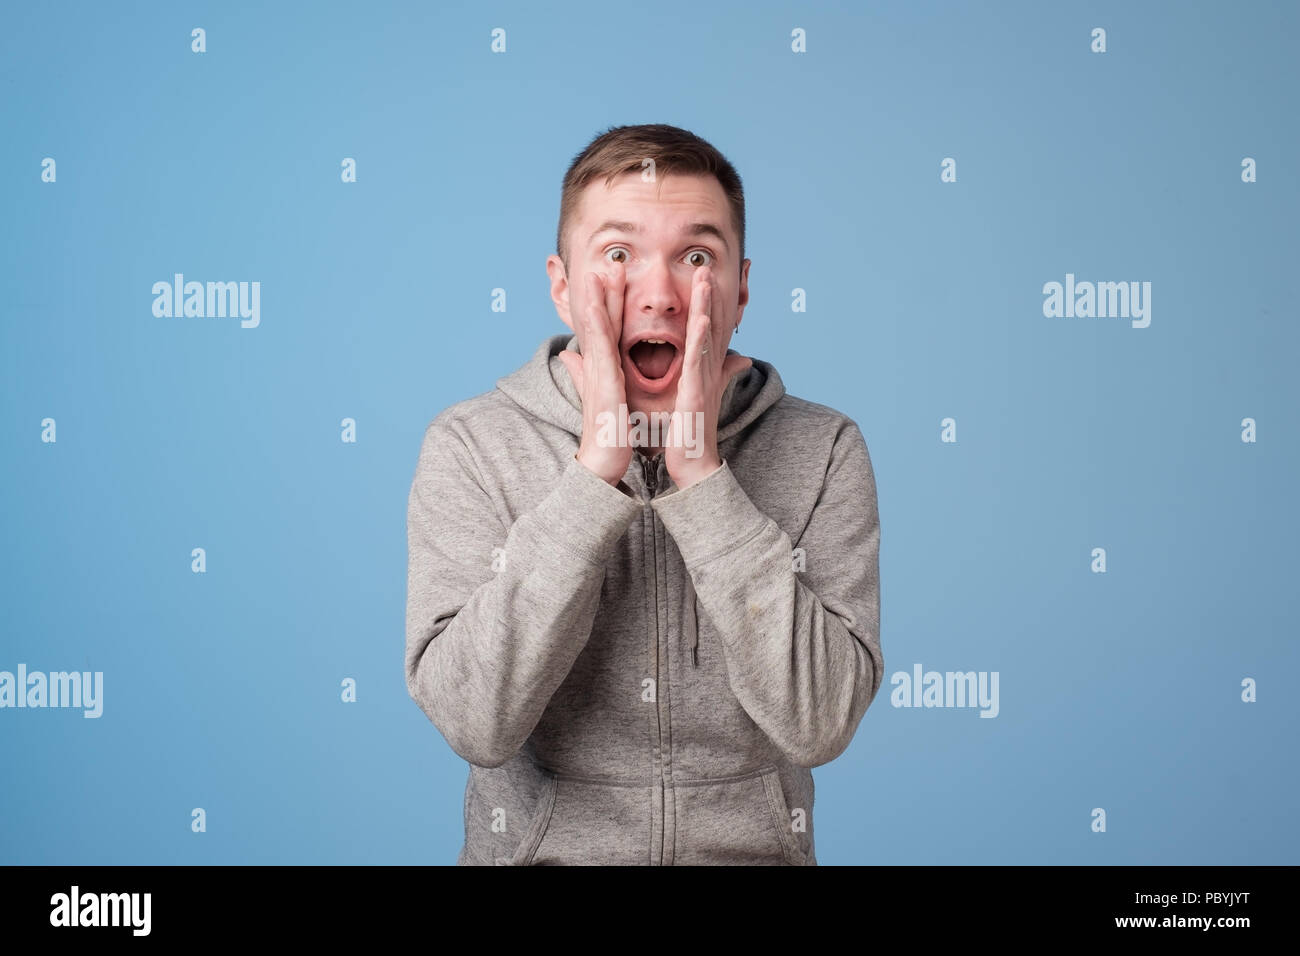 portrait of excited european man openinig mouth and shouting Stock Photo